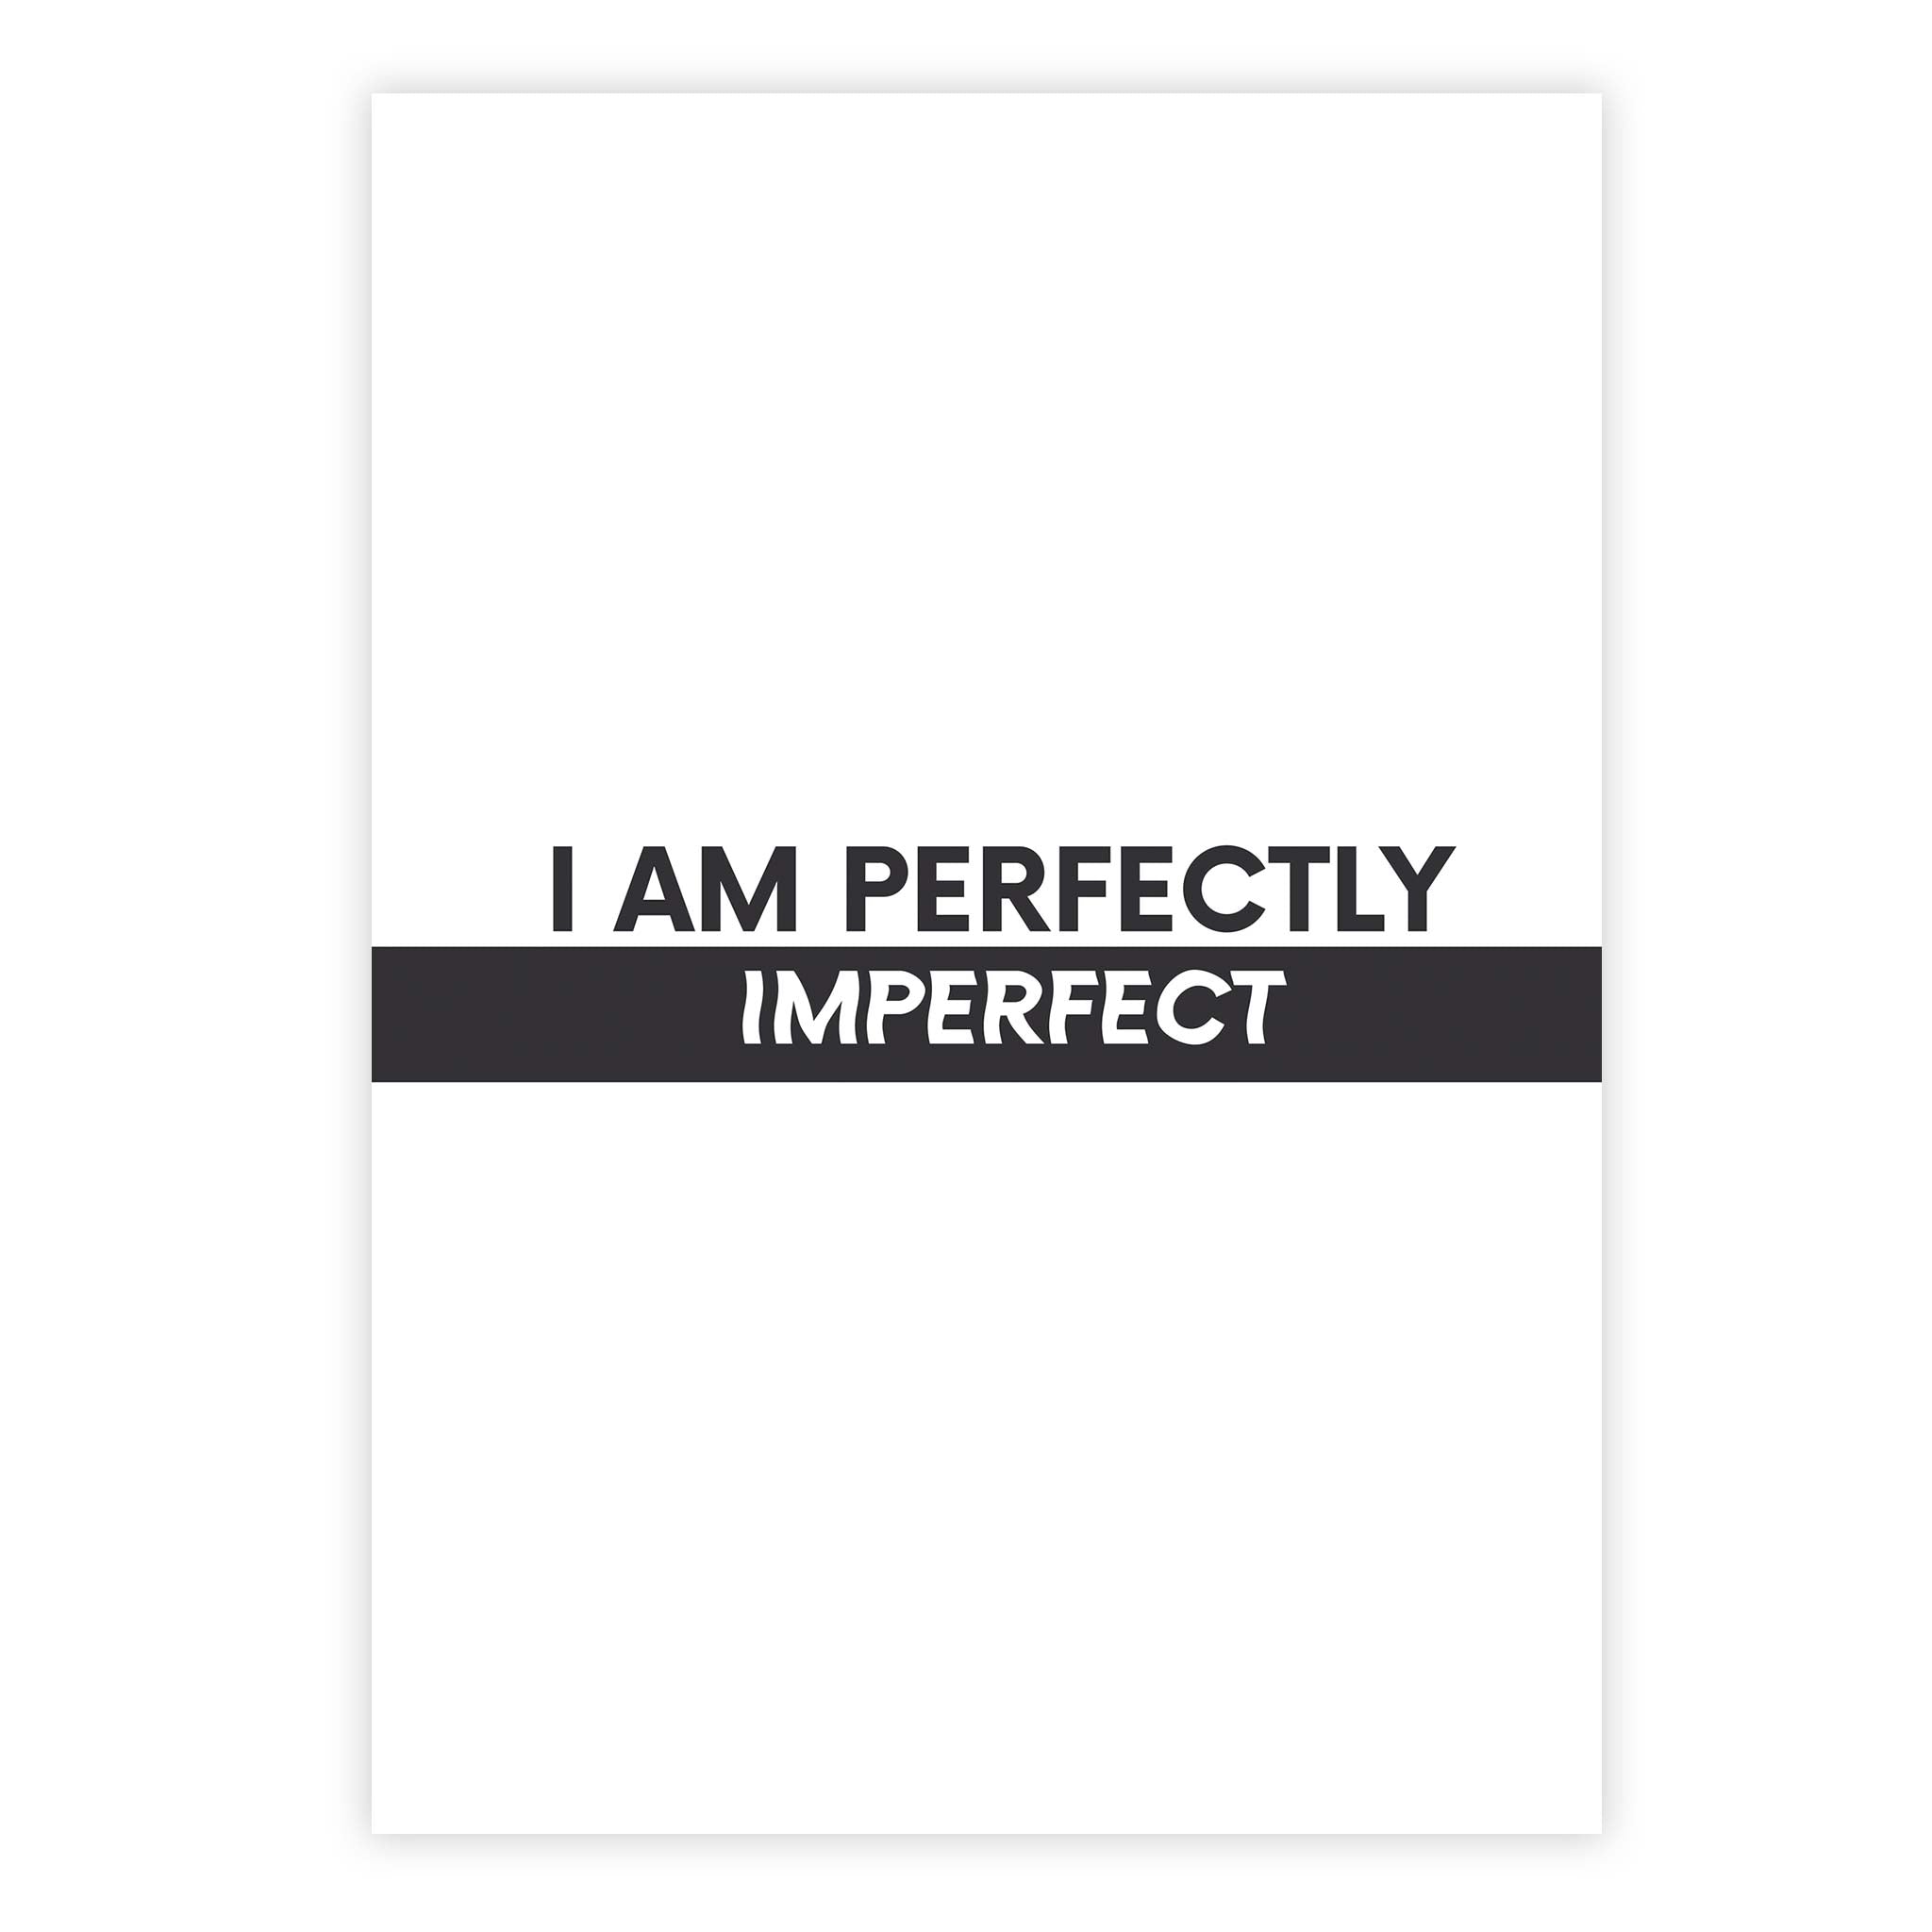 I am perfectly imperfect